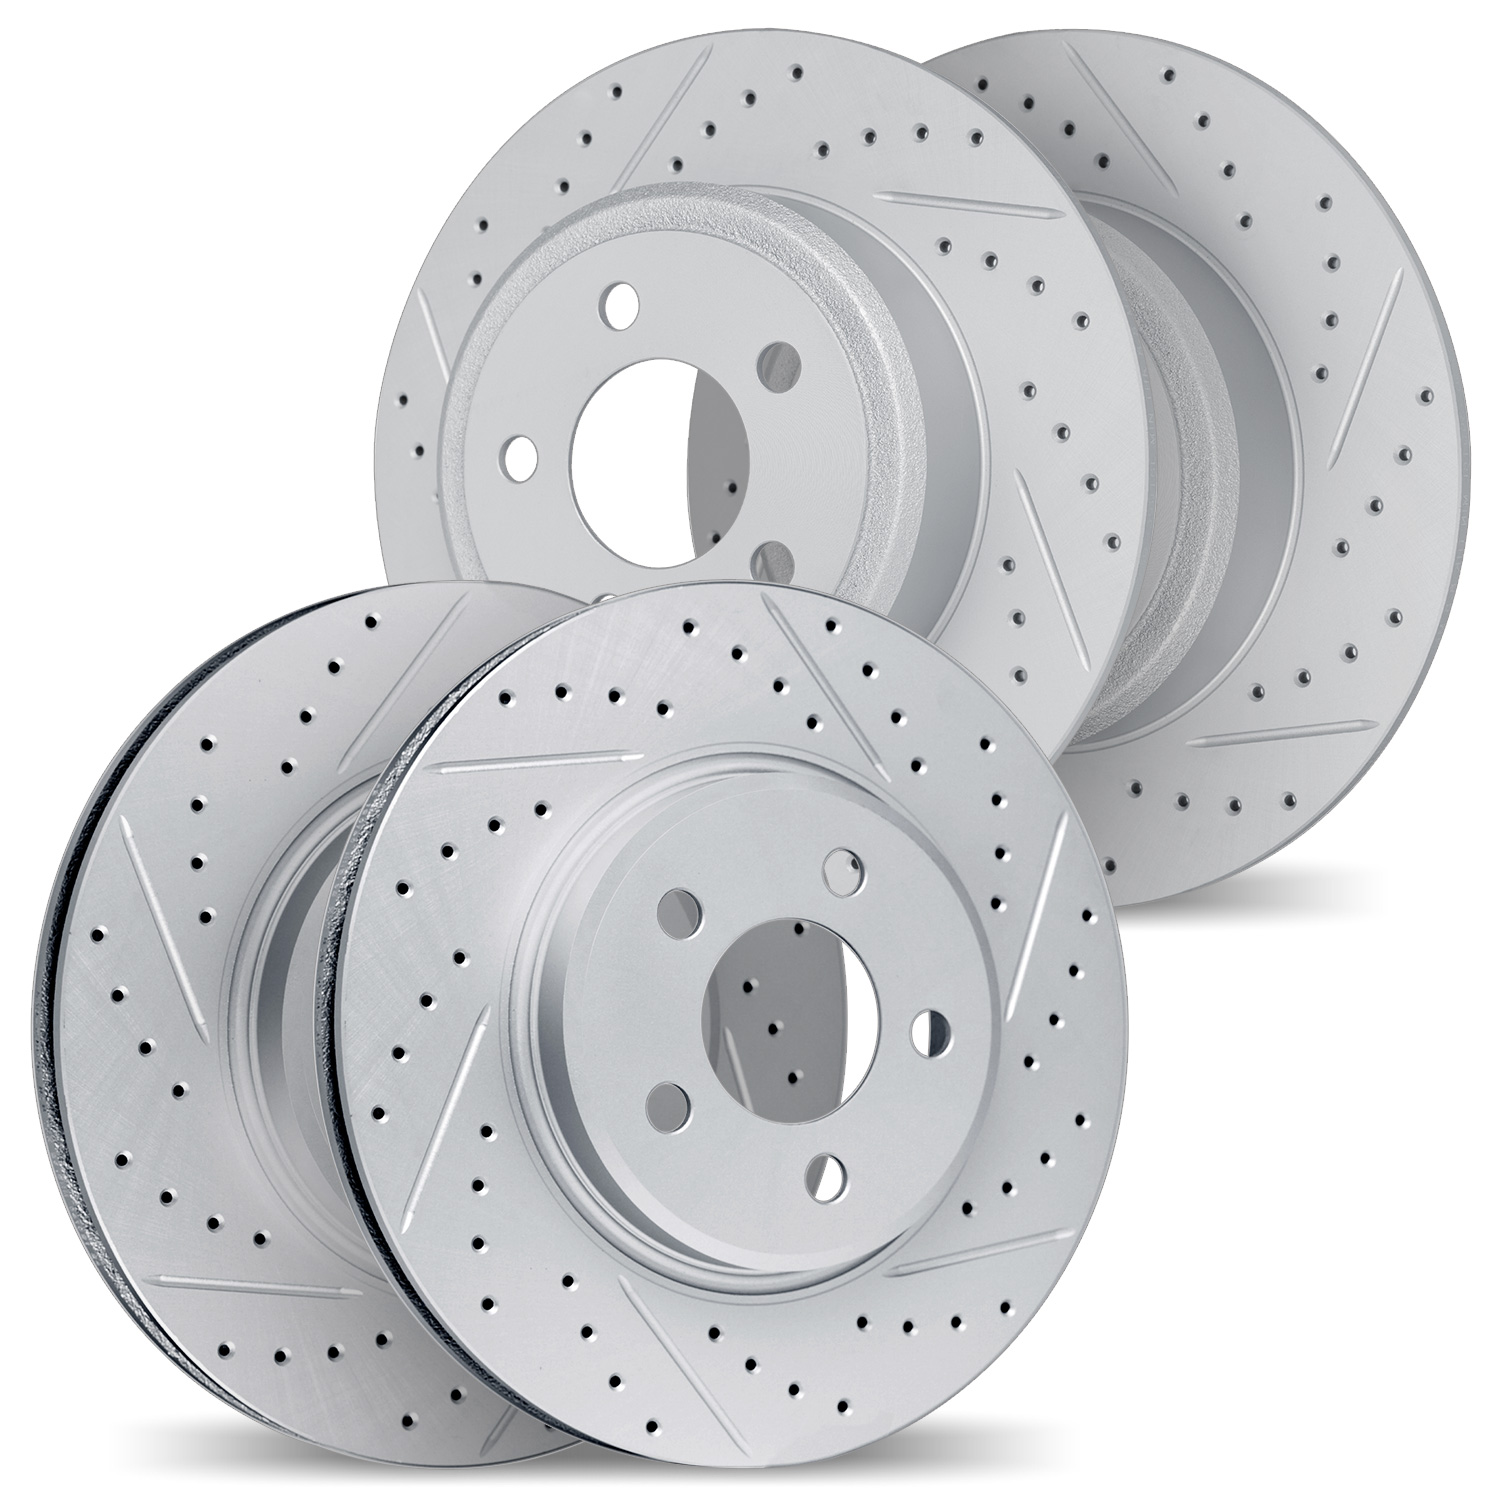 2004-59042 Geoperformance Drilled/Slotted Brake Rotors, Fits Select Acura/Honda, Position: Front and Rear